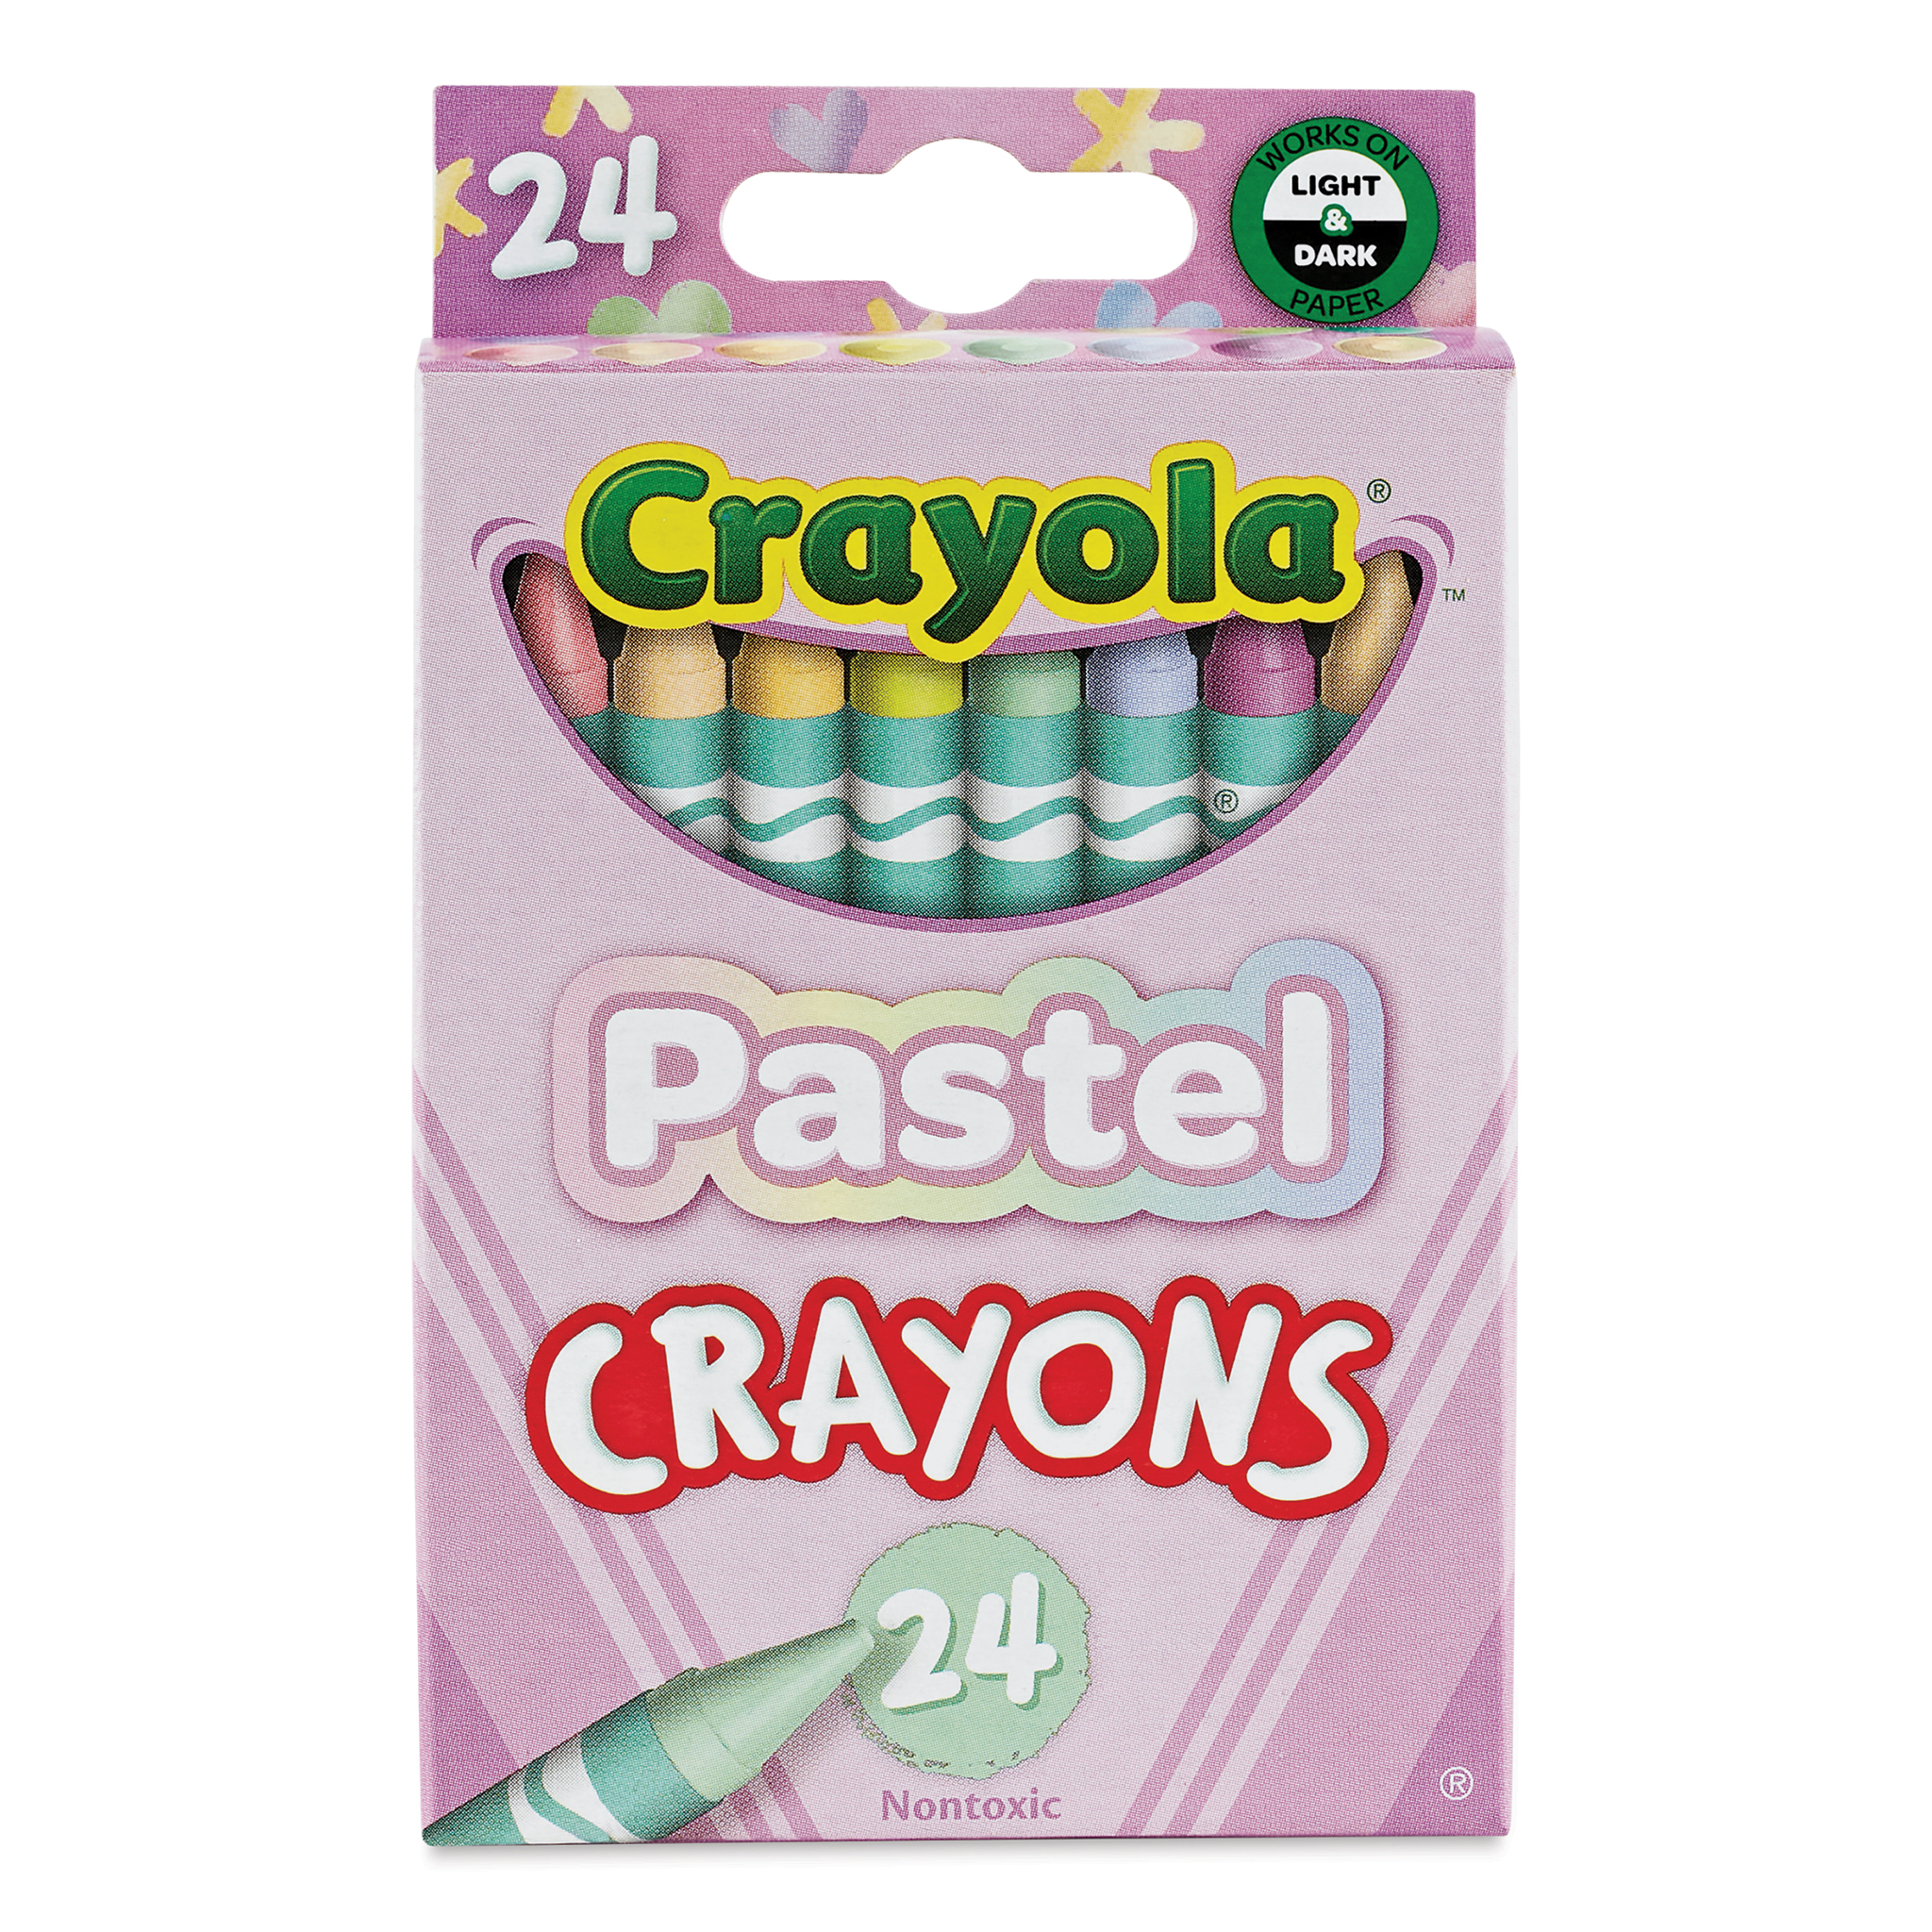 Are Crayola Oil Pastels Better Than Crayola Crayons? 